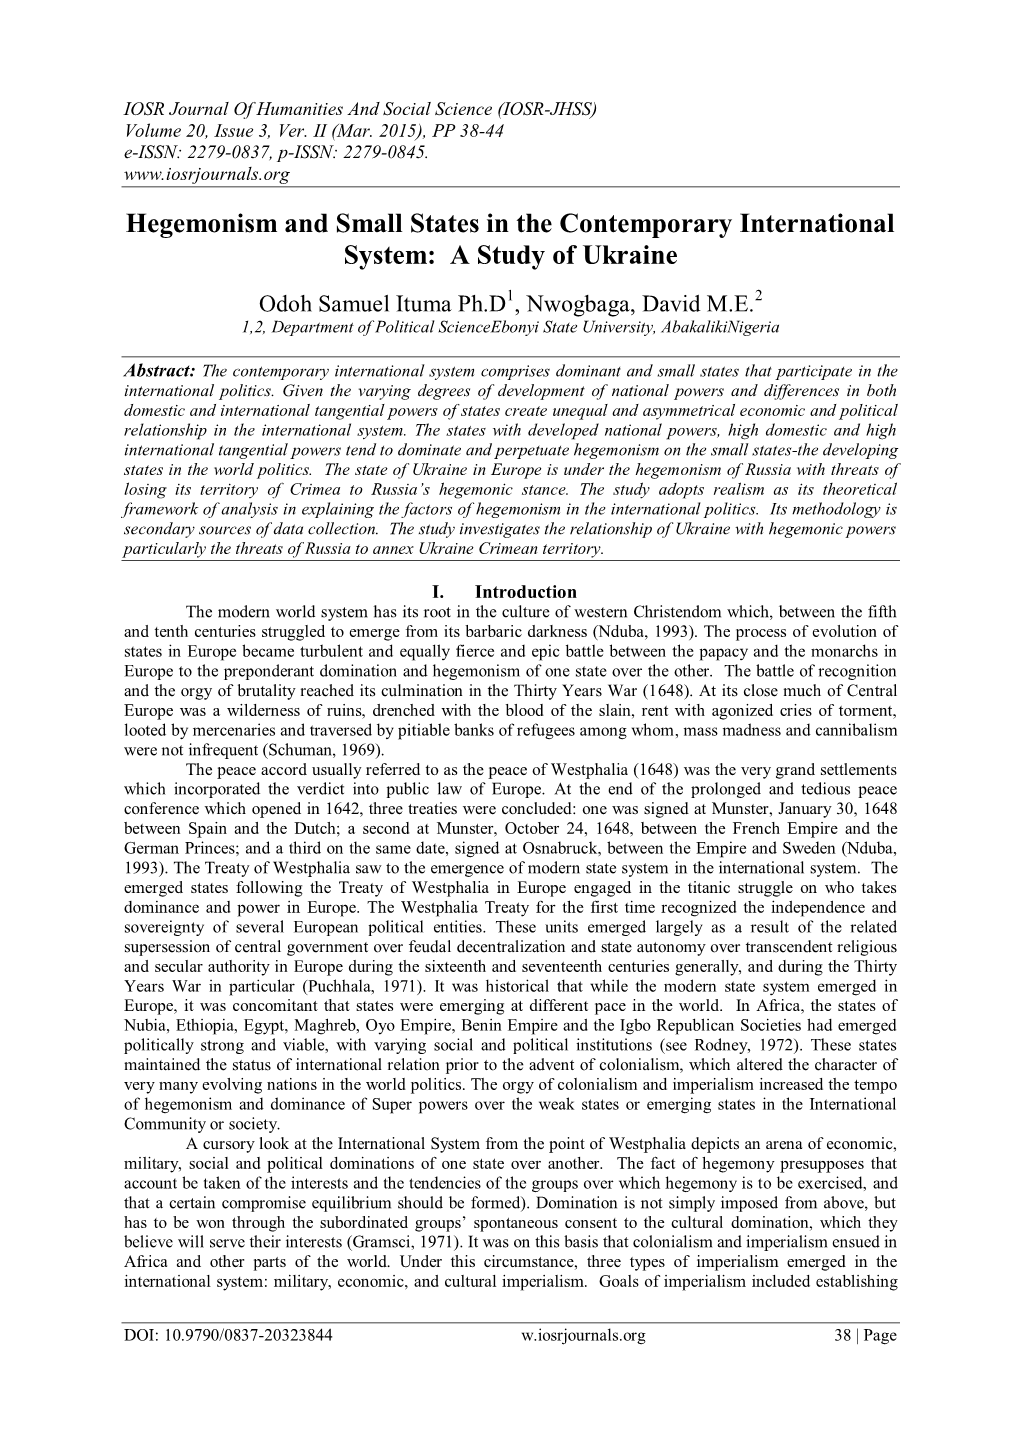 Hegemonism and Small States in the Contemporary International System: a Study of Ukraine